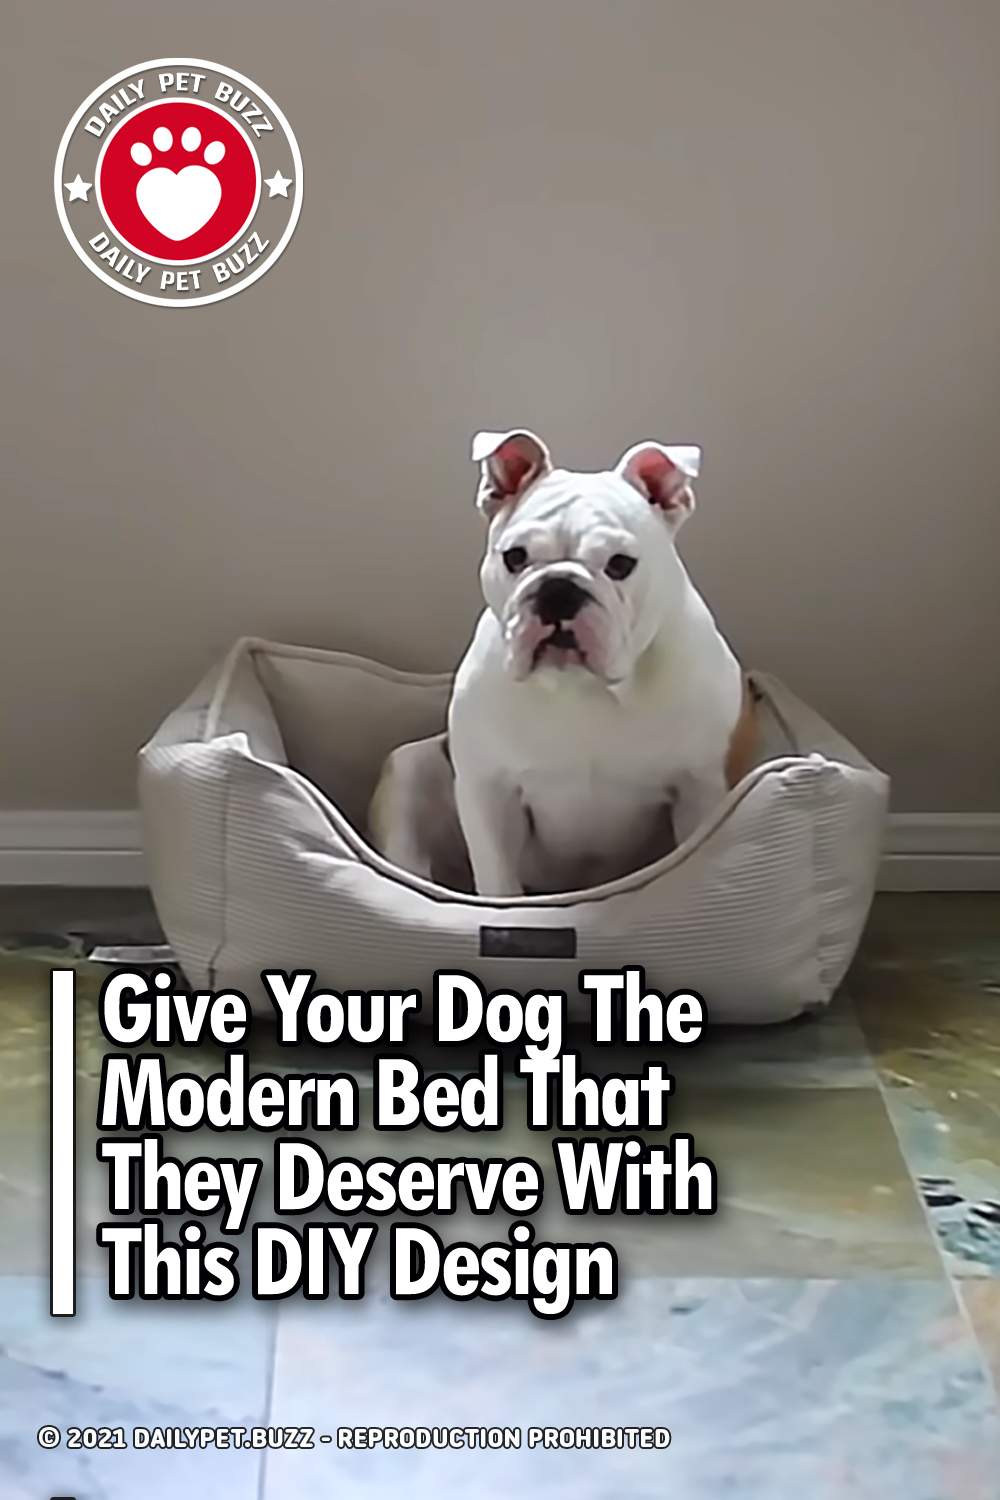 Give Your Dog The Modern Bed That They Deserve With This DIY Design